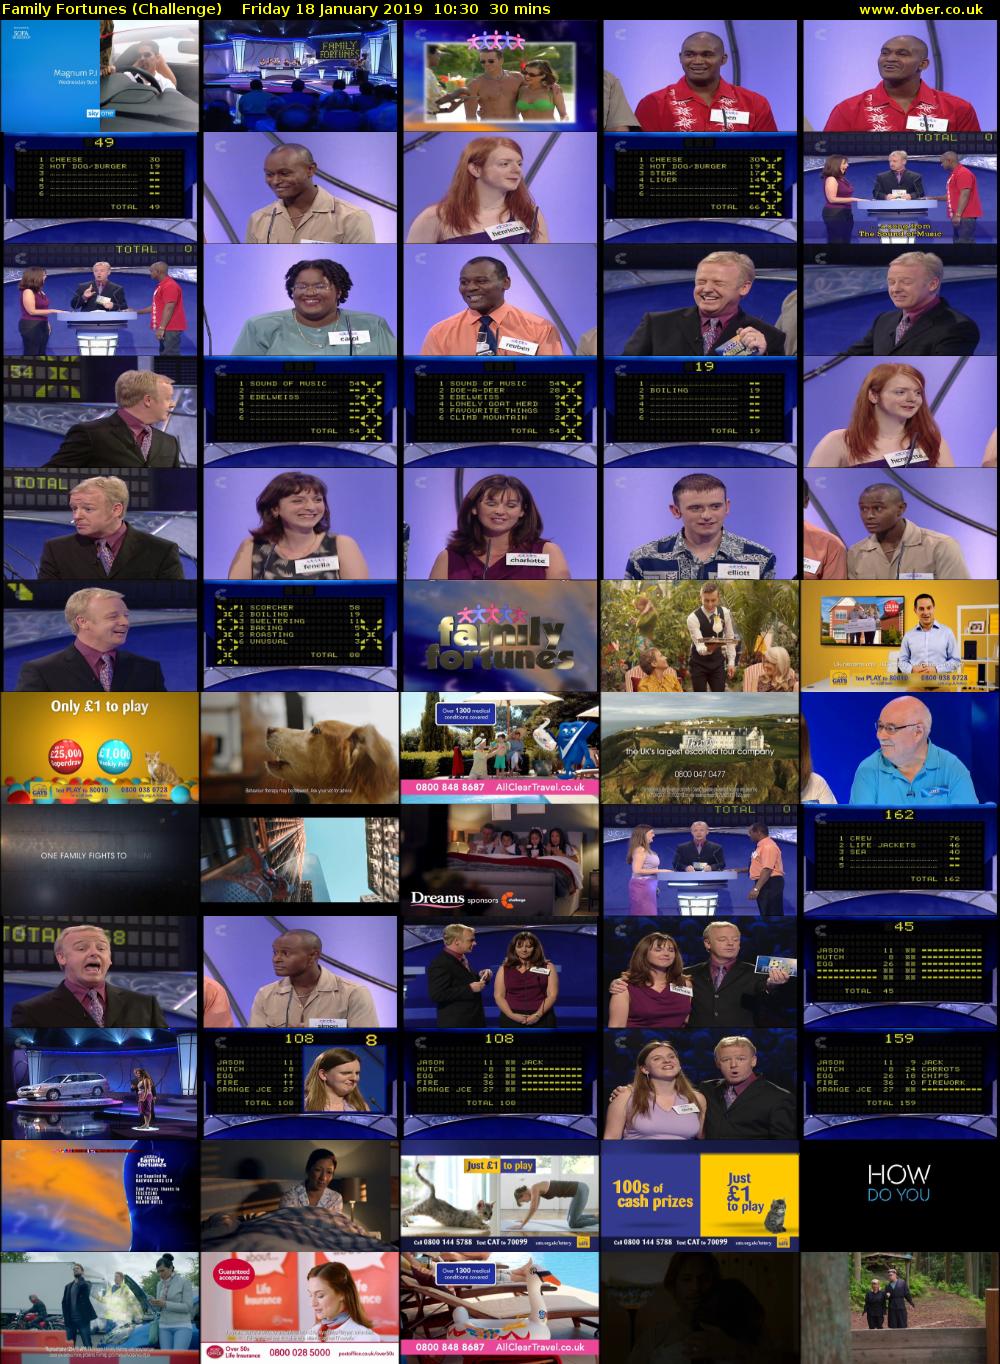 Family Fortunes (Challenge) Friday 18 January 2019 10:30 - 11:00